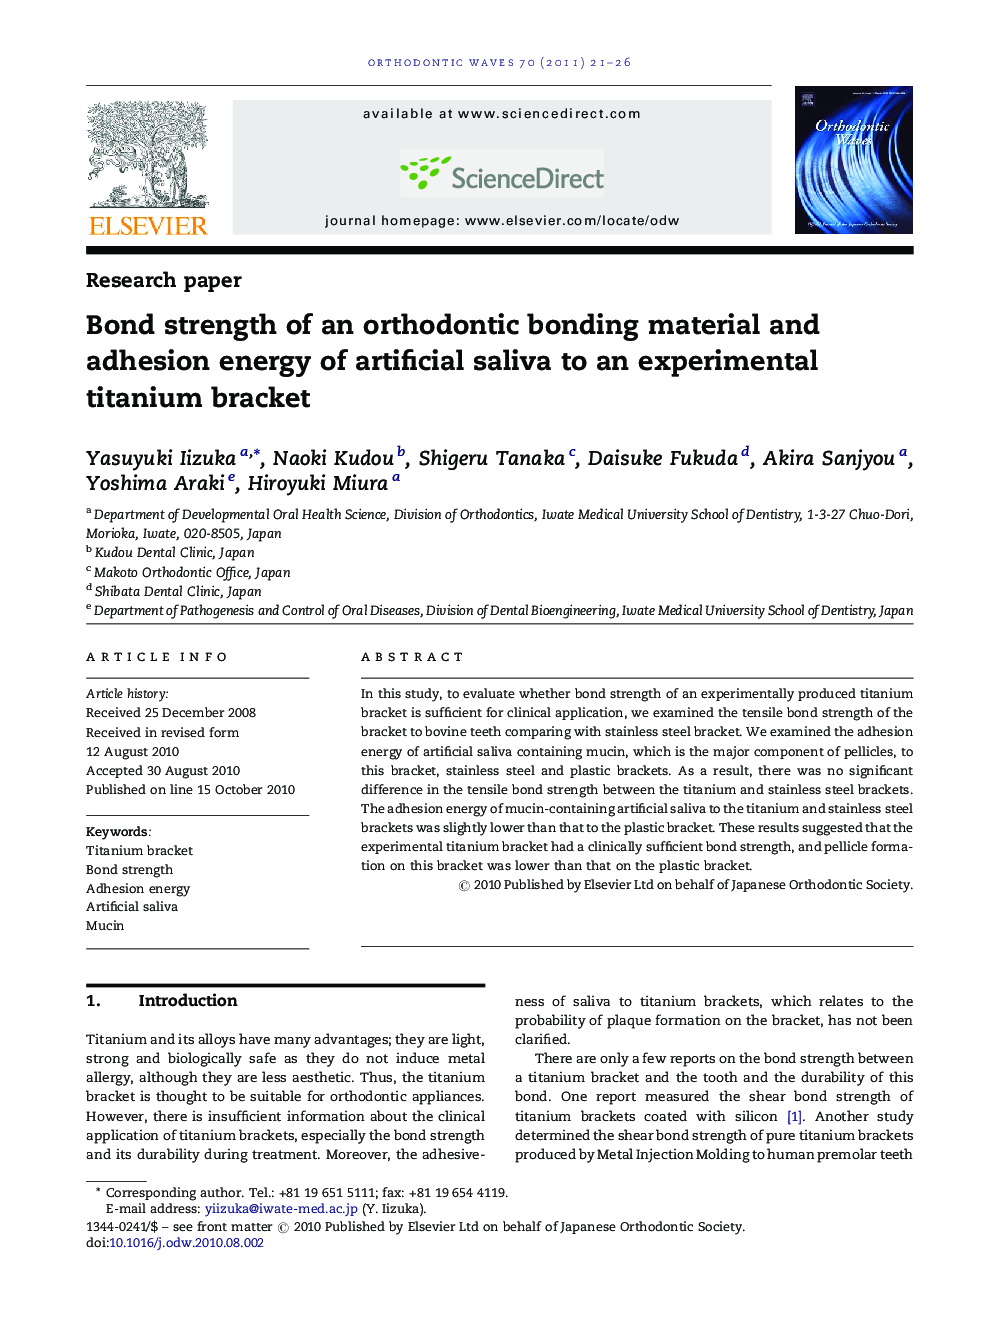 Bond strength of an orthodontic bonding material and adhesion energy of artificial saliva to an experimental titanium bracket